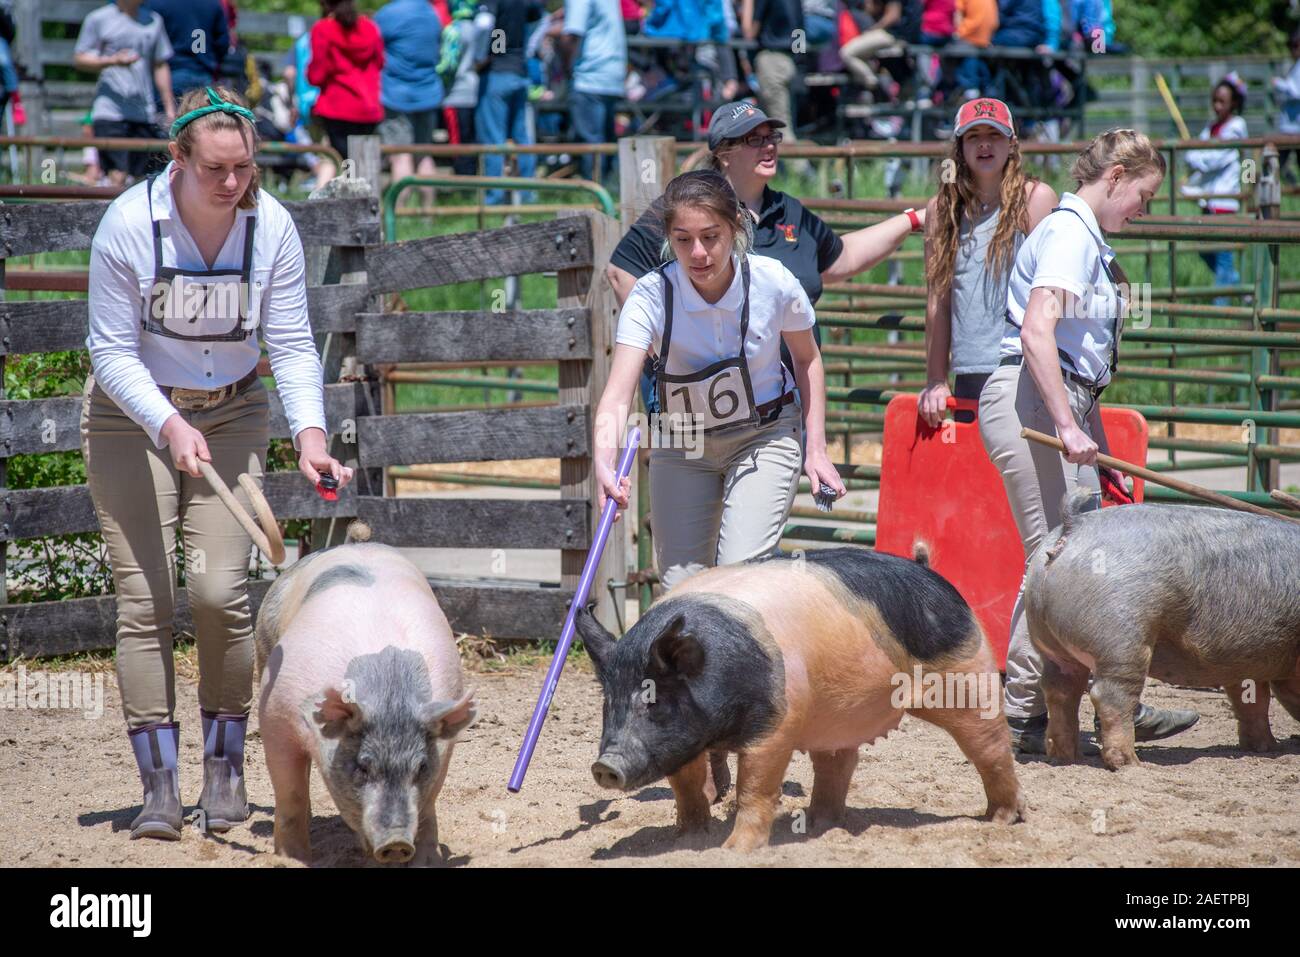 Handlers diligently tending to their pigs, Maryland Day 2019 , College Park, Maryland. Stock Photo